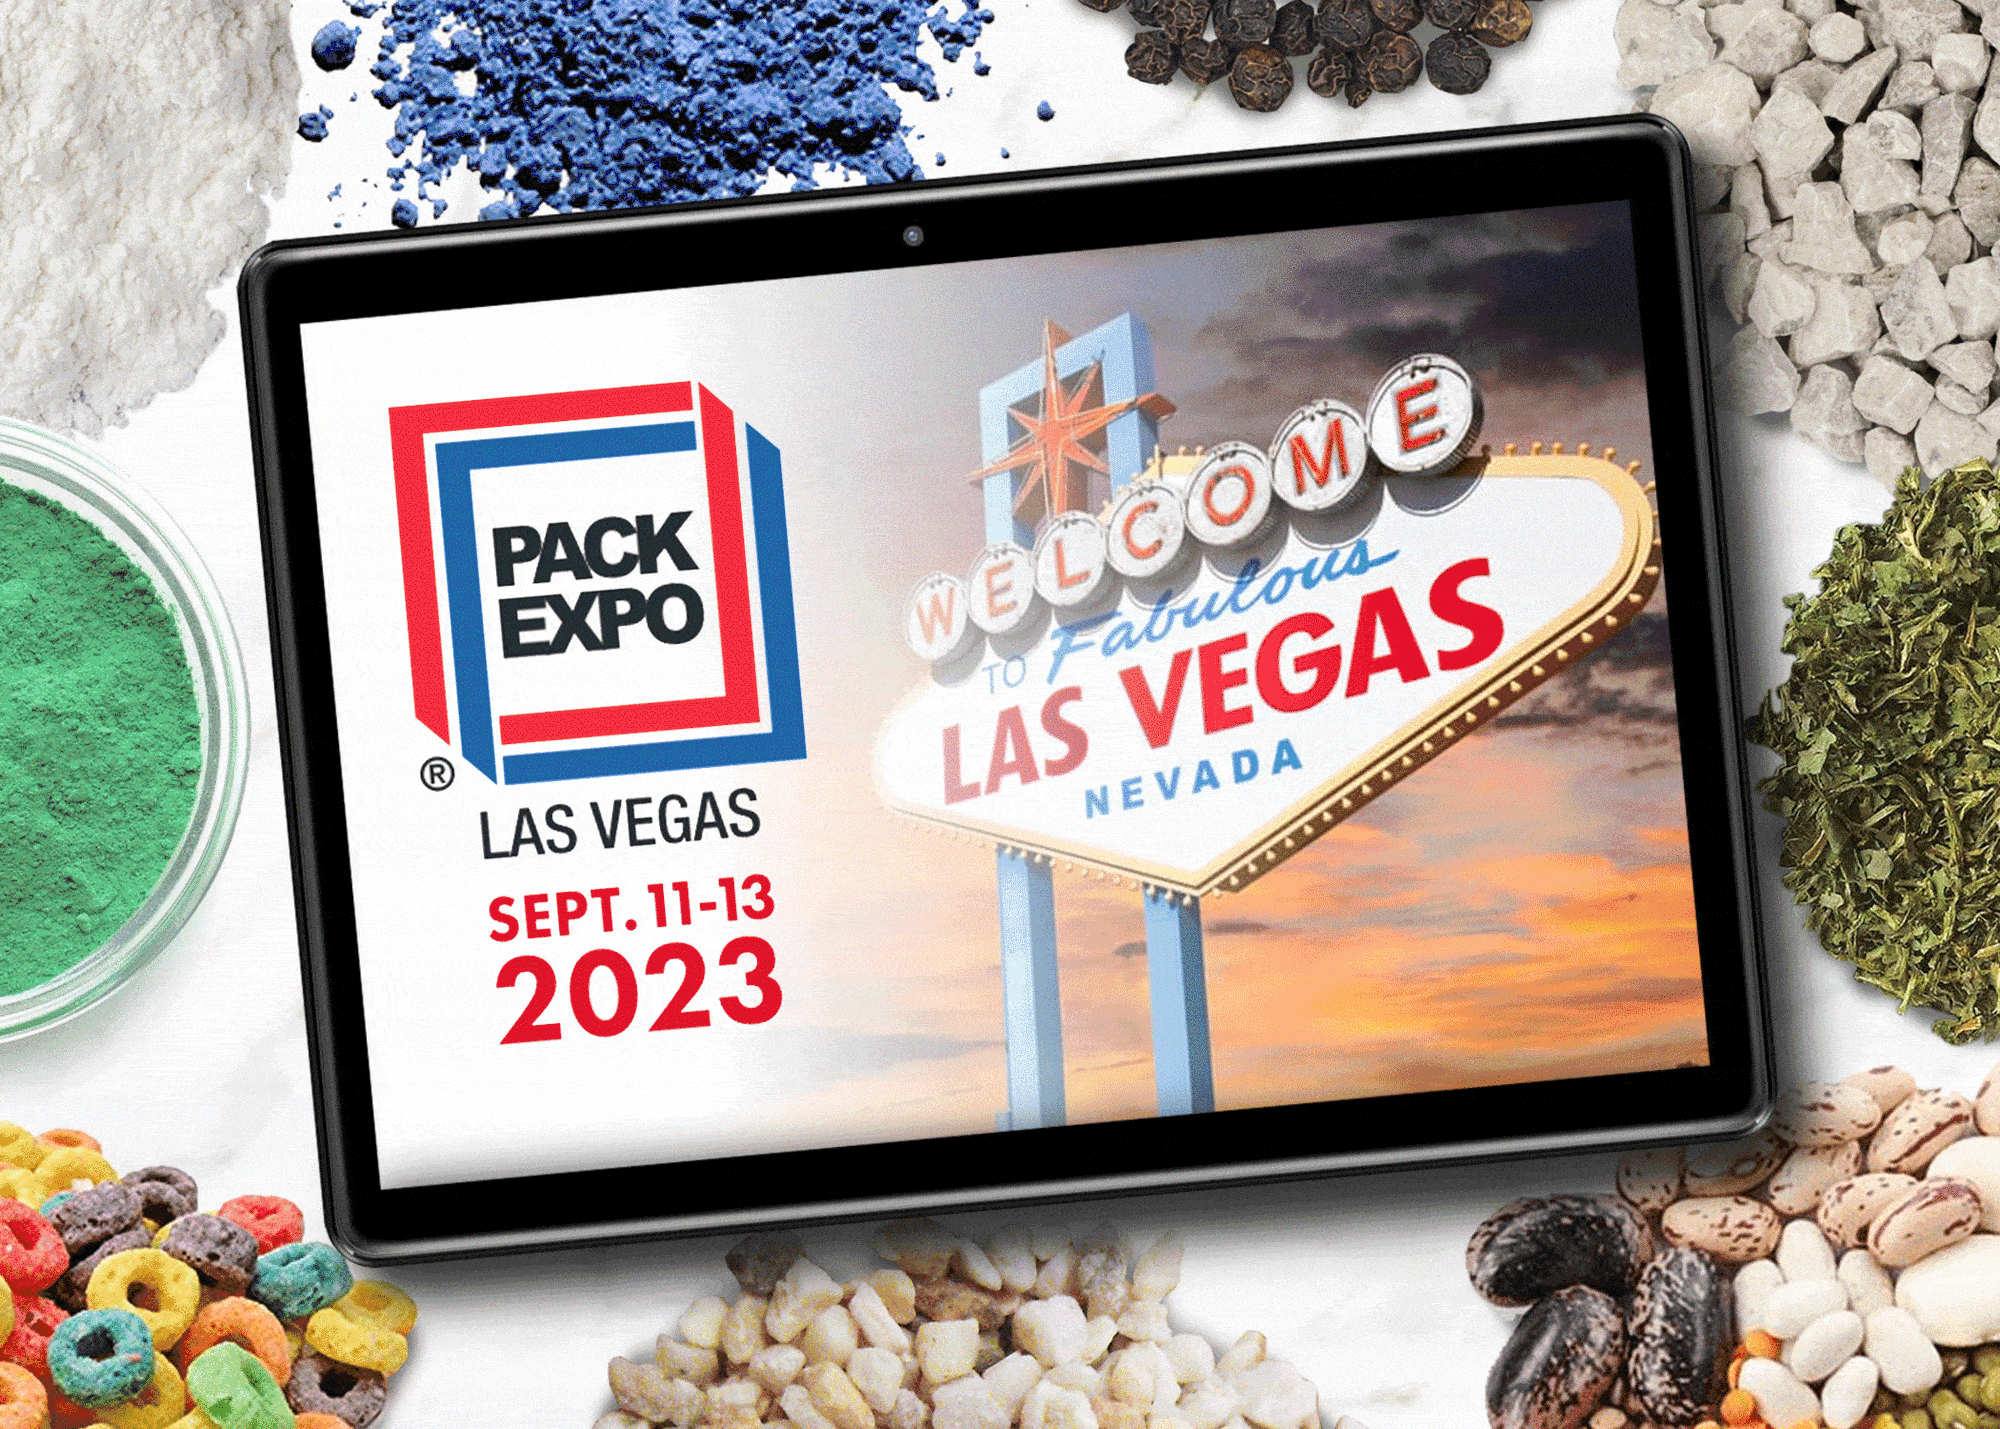 We You to Visit Our Booth at Pack Expo 2023 in Las Vegas